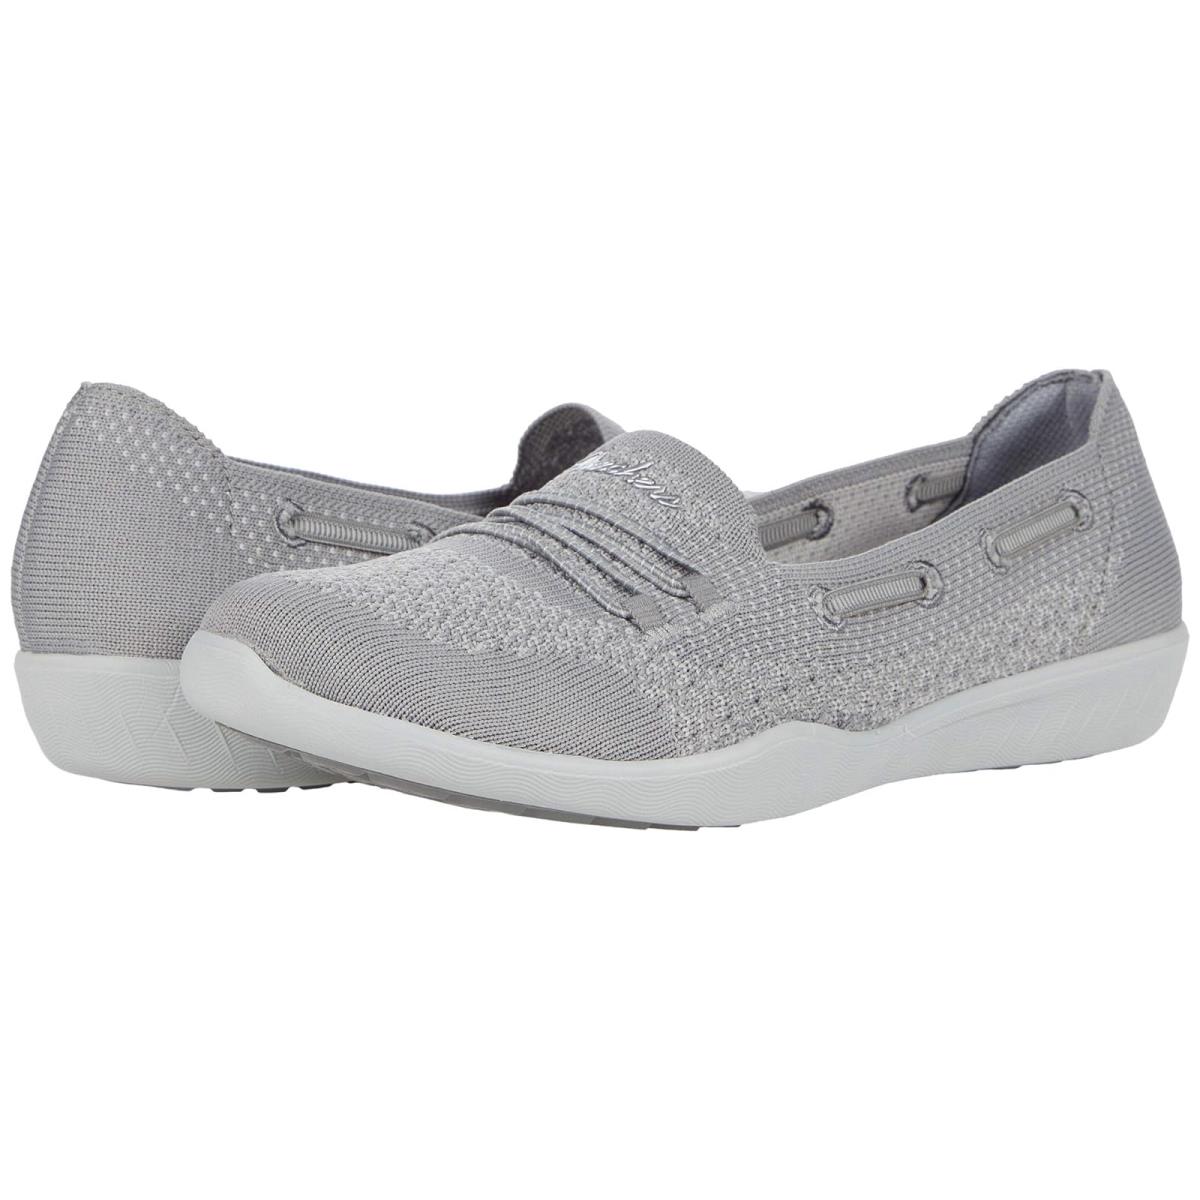 Woman`s Sneakers Athletic Shoes Skechers Newbury St. - Easily Adored Gray